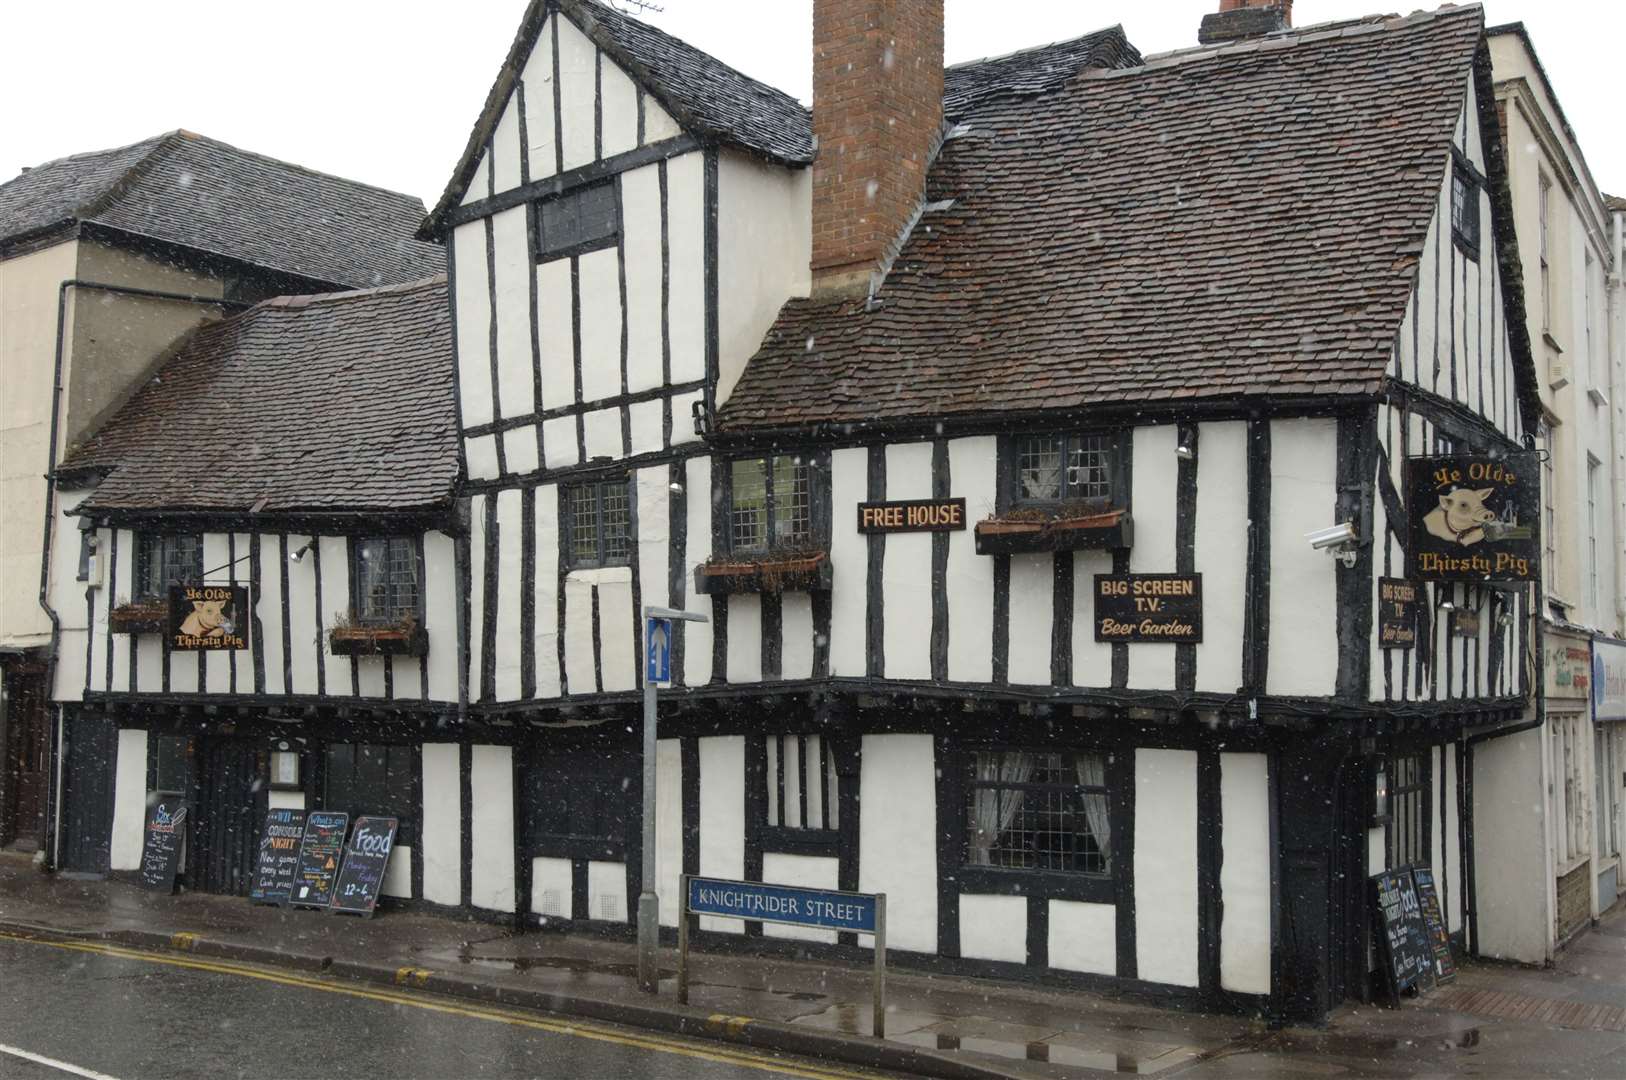 The building has allegedly stood strong on Knightrider Street since 1440. Picture John Wardley